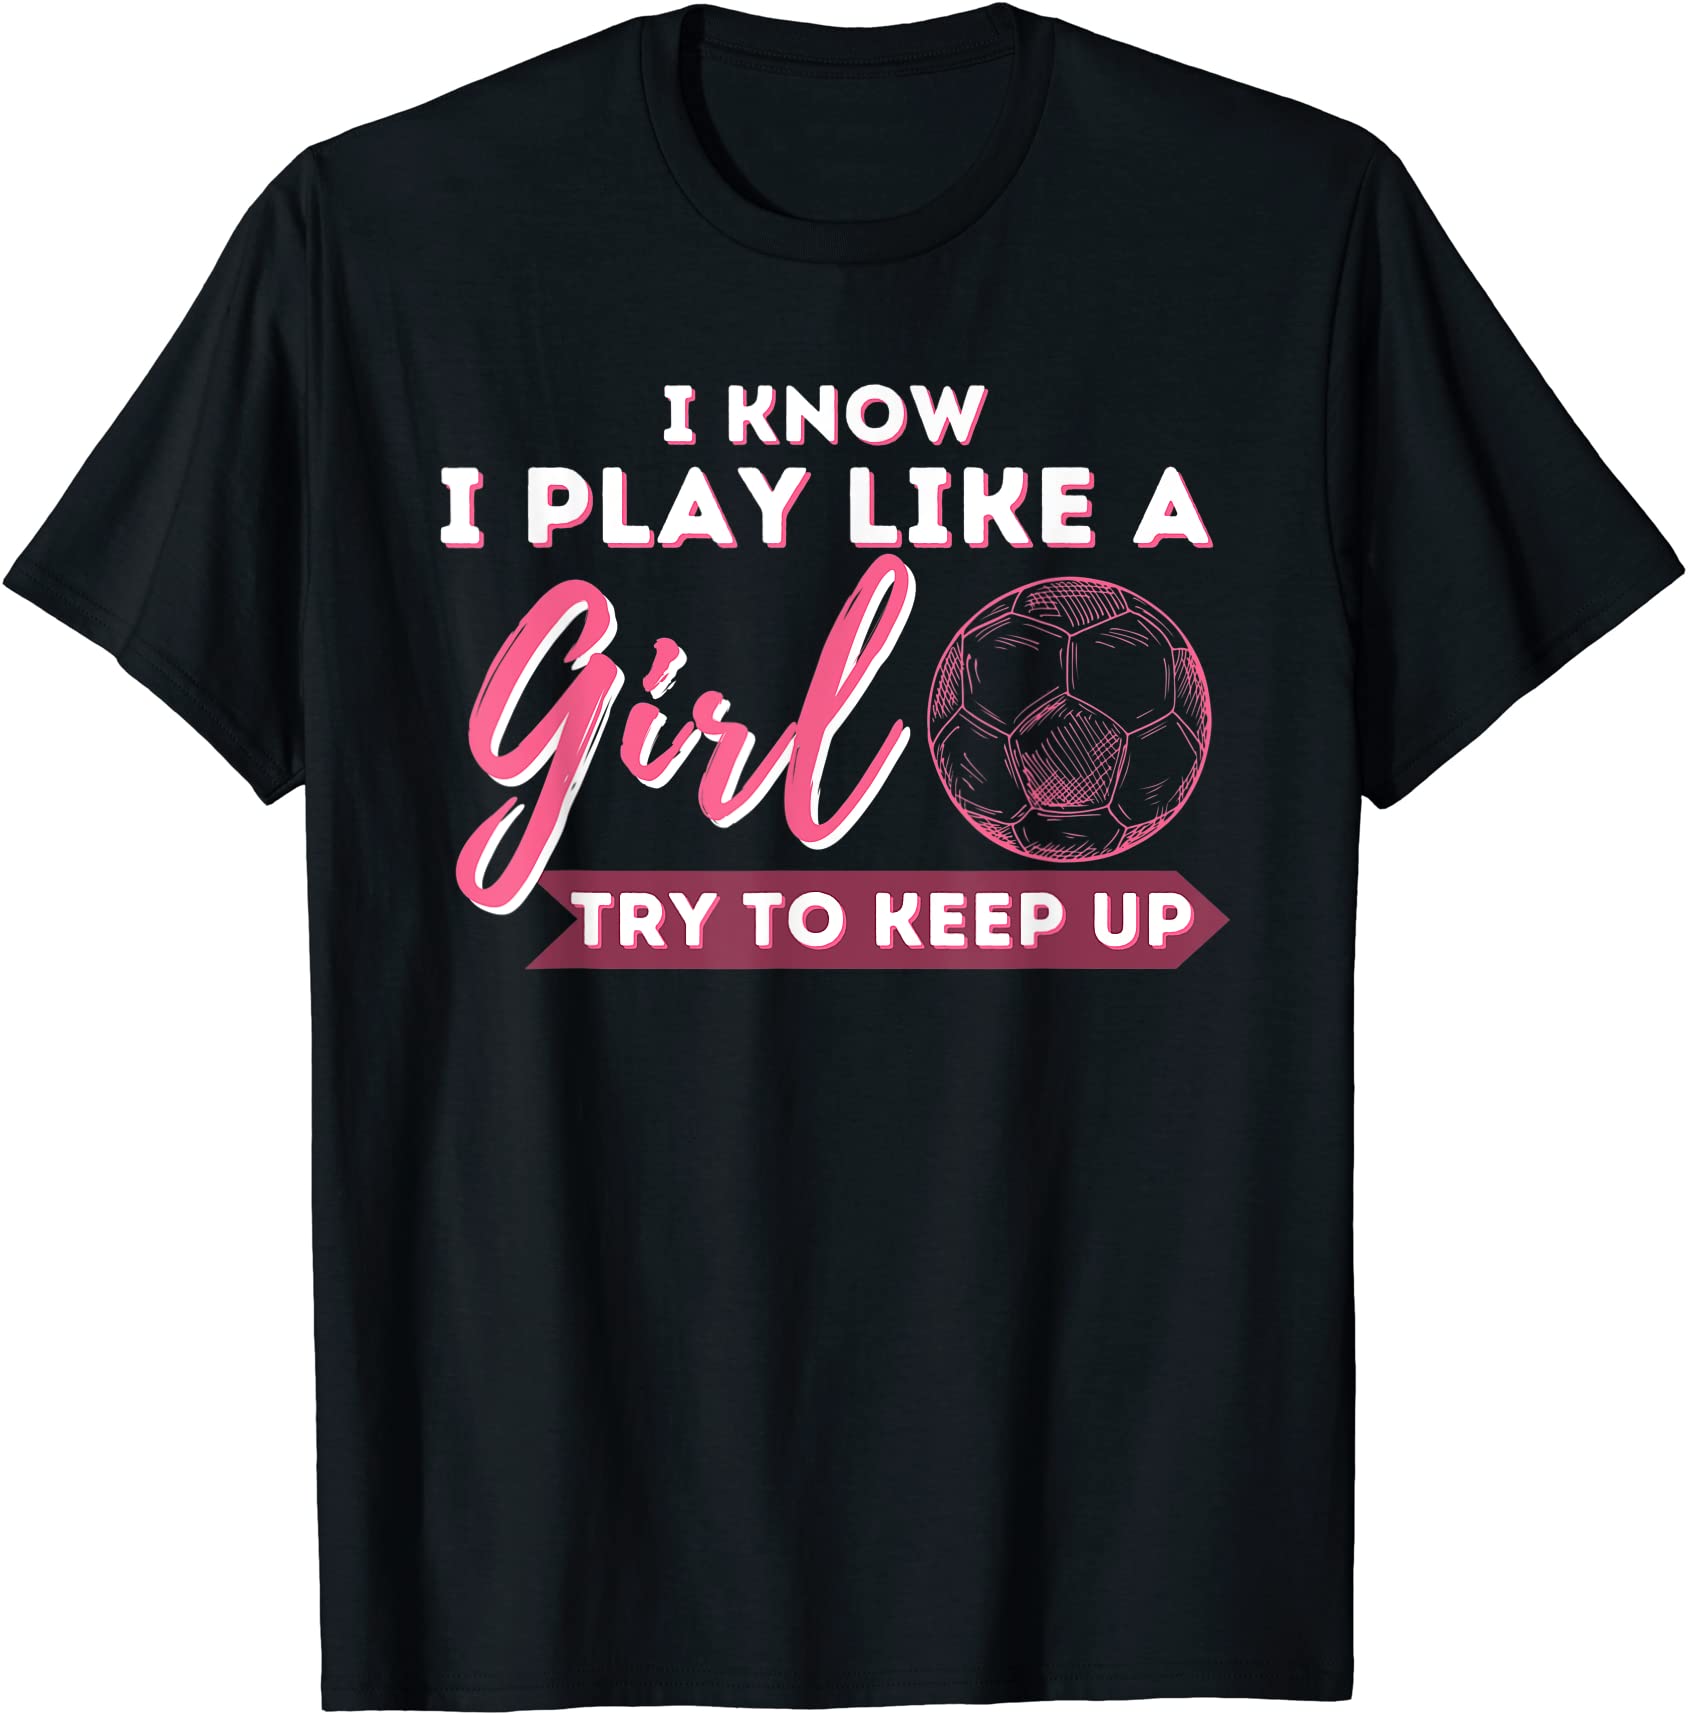 i know i play like a girl try to keep up soccer girl t shirt men - Buy ...